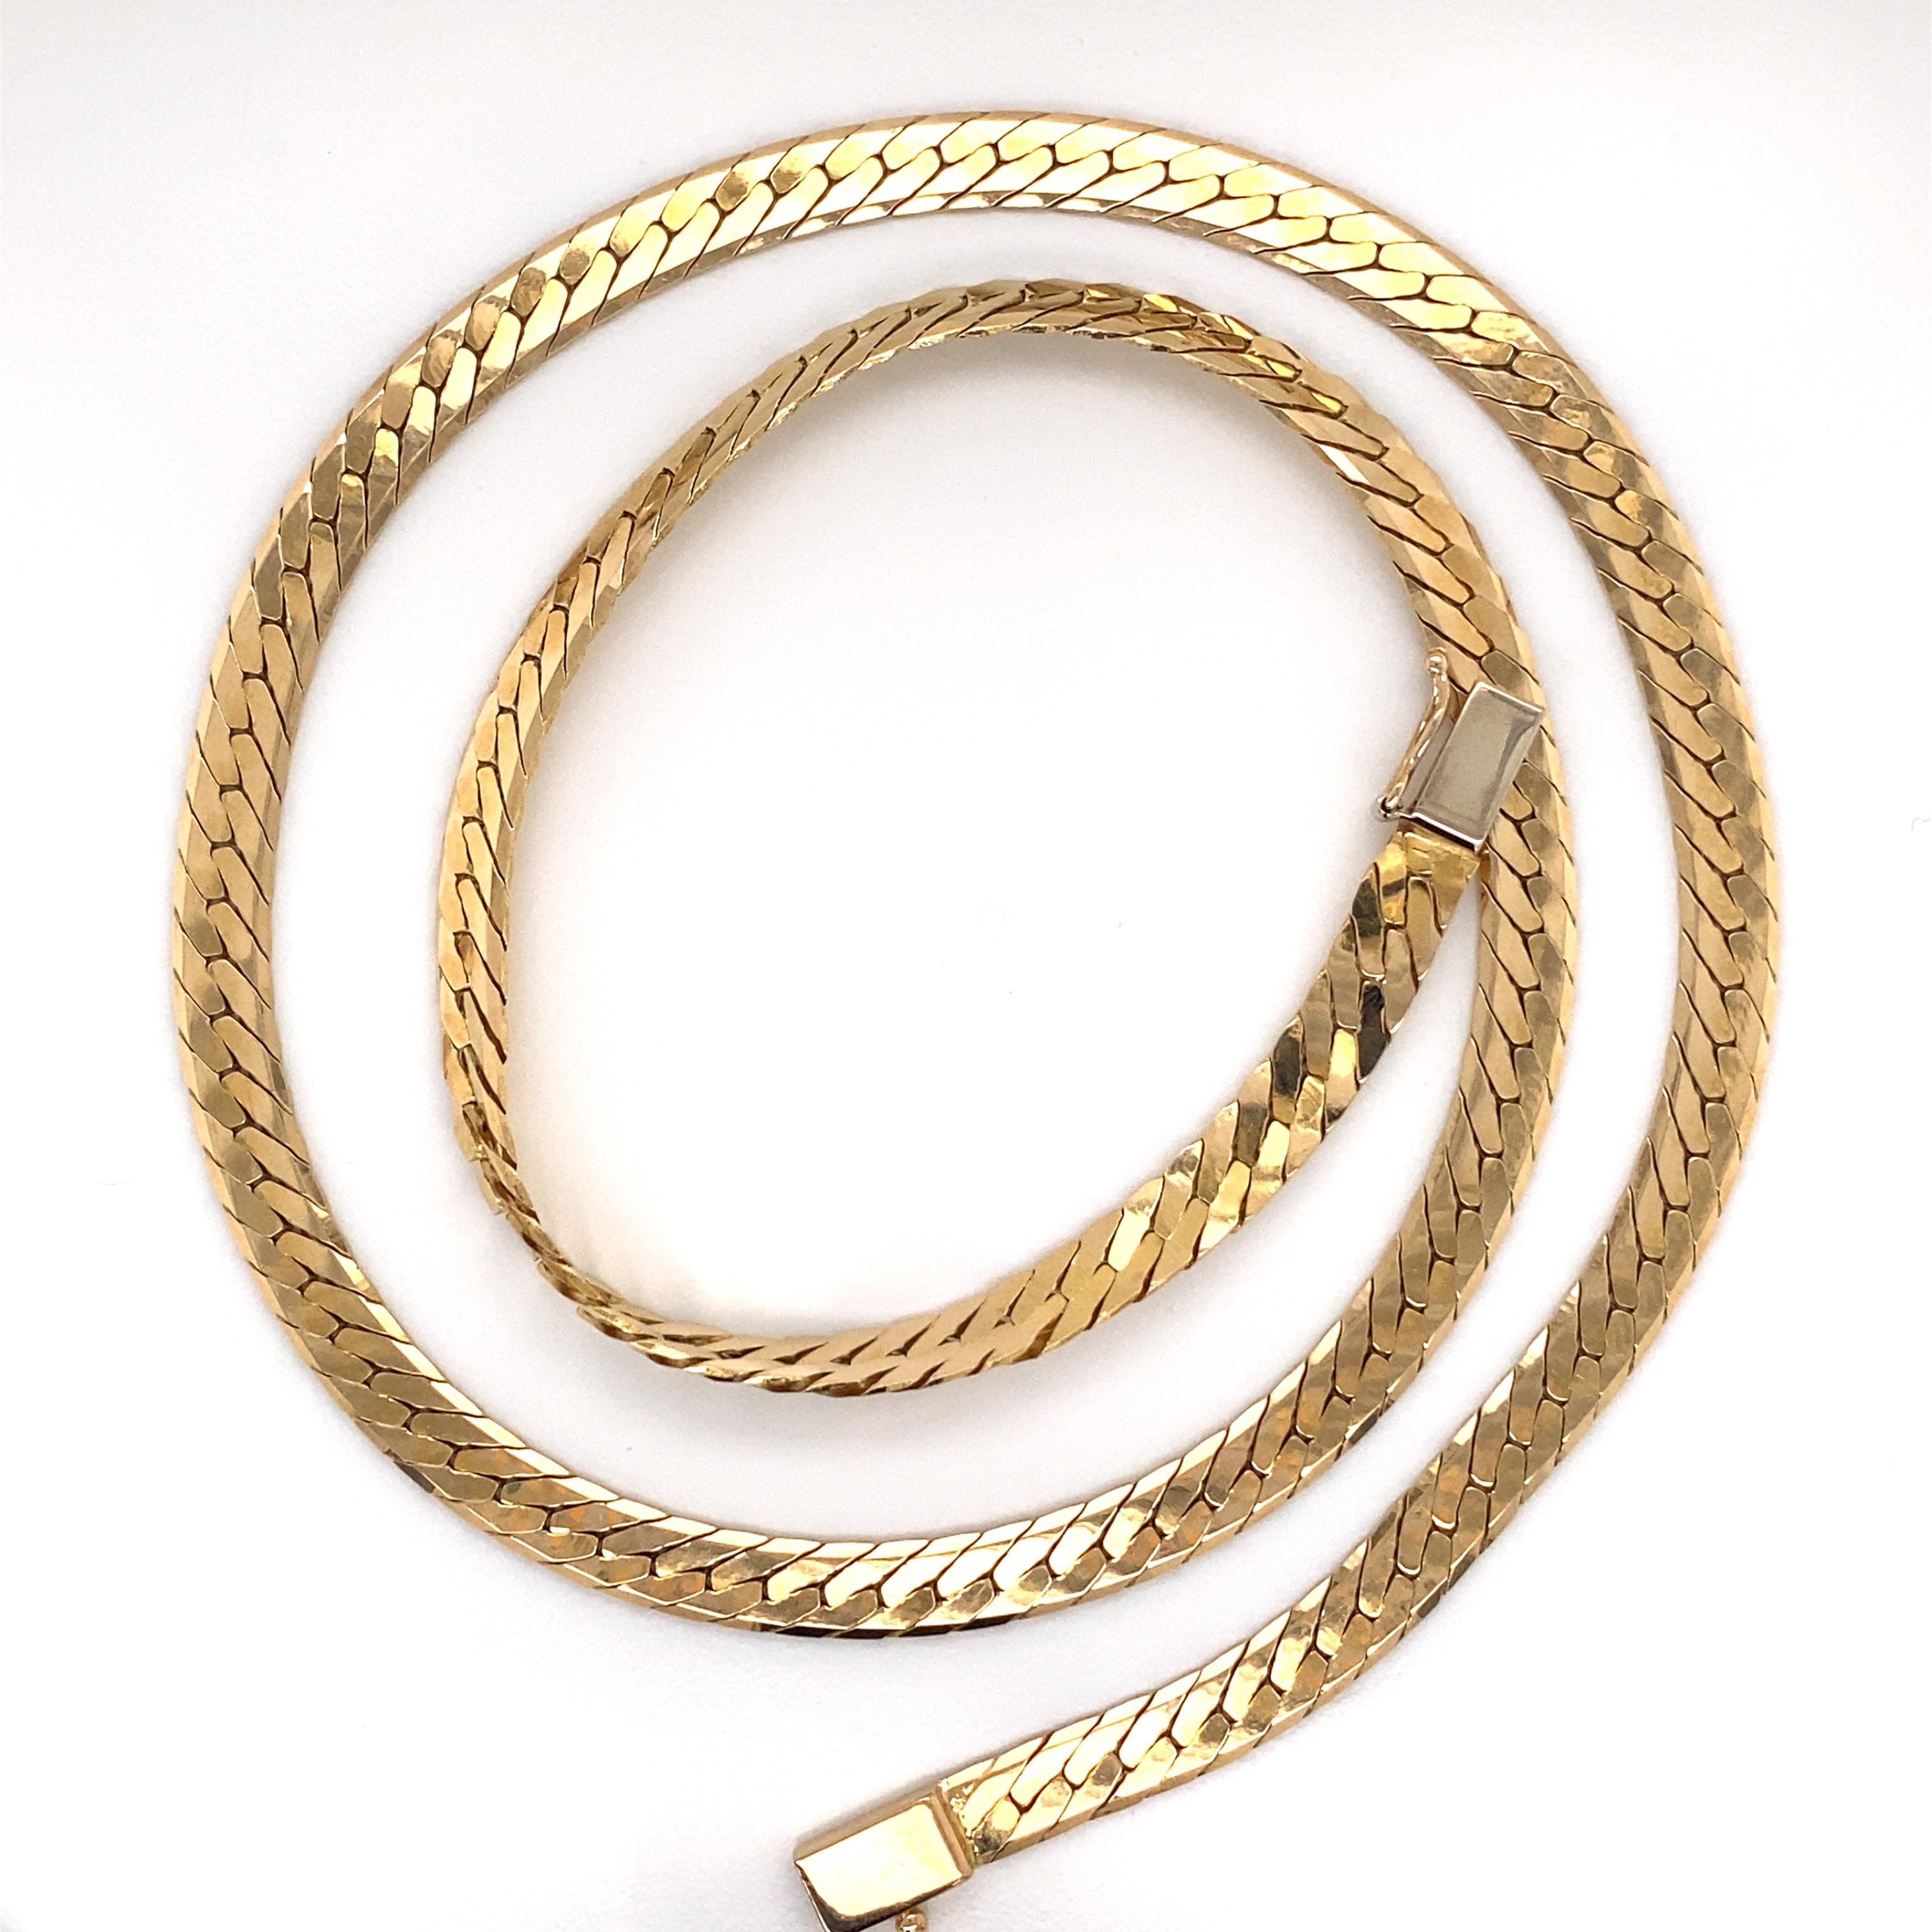 Vintage 1980’s 14K Yellow Gold Herringbone Necklace - The necklace is 5.1mm wide and 19 inches long and features a plunger clasp with a figure 8 safety. The necklace weighs 23.4 grams.